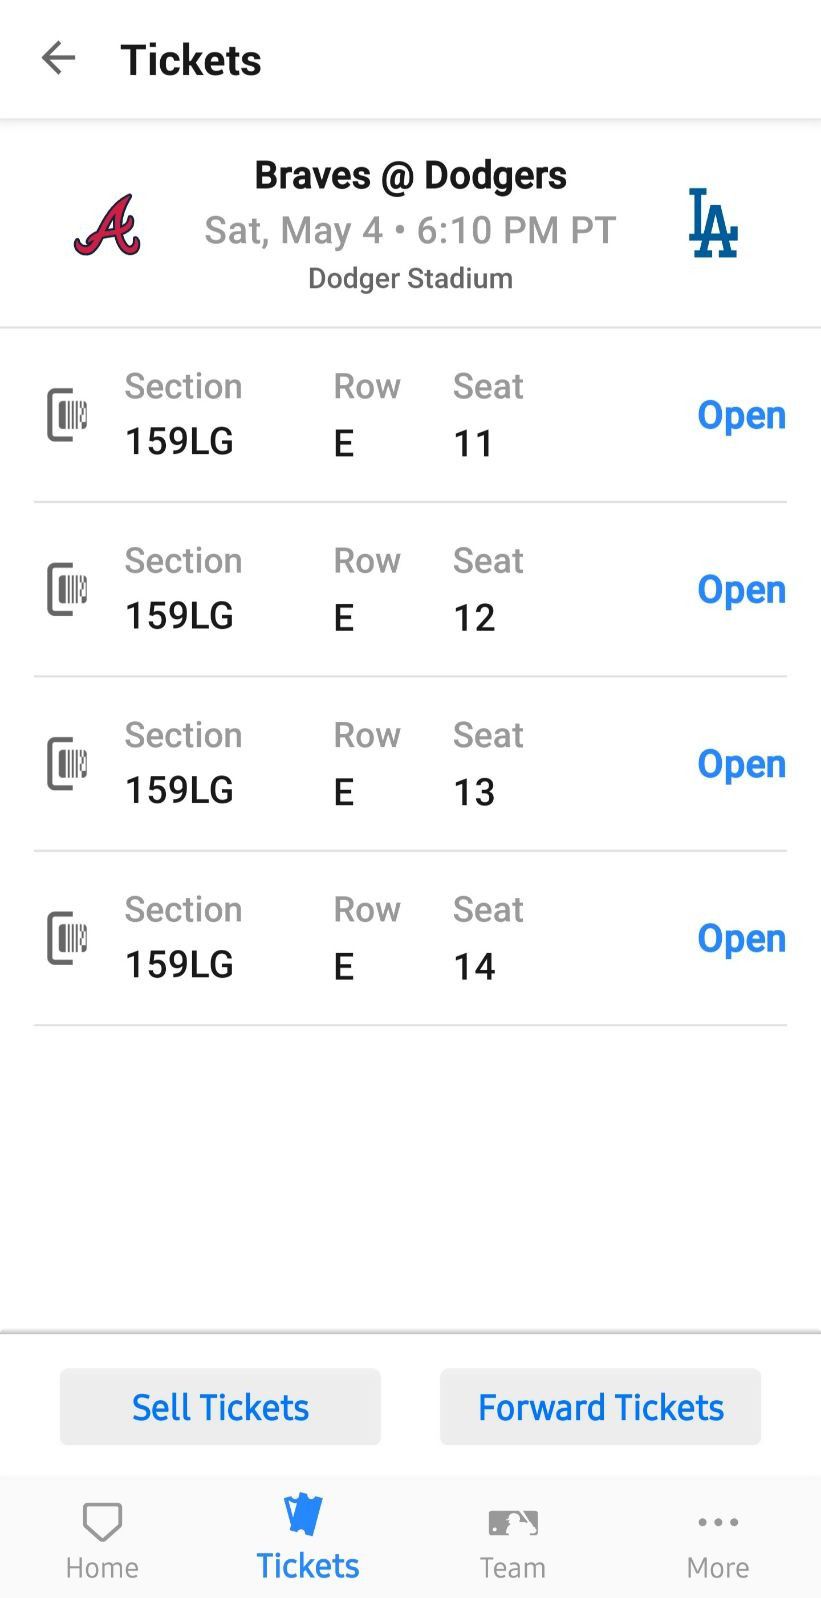 2 Dodgers vs Braves Game Tickets